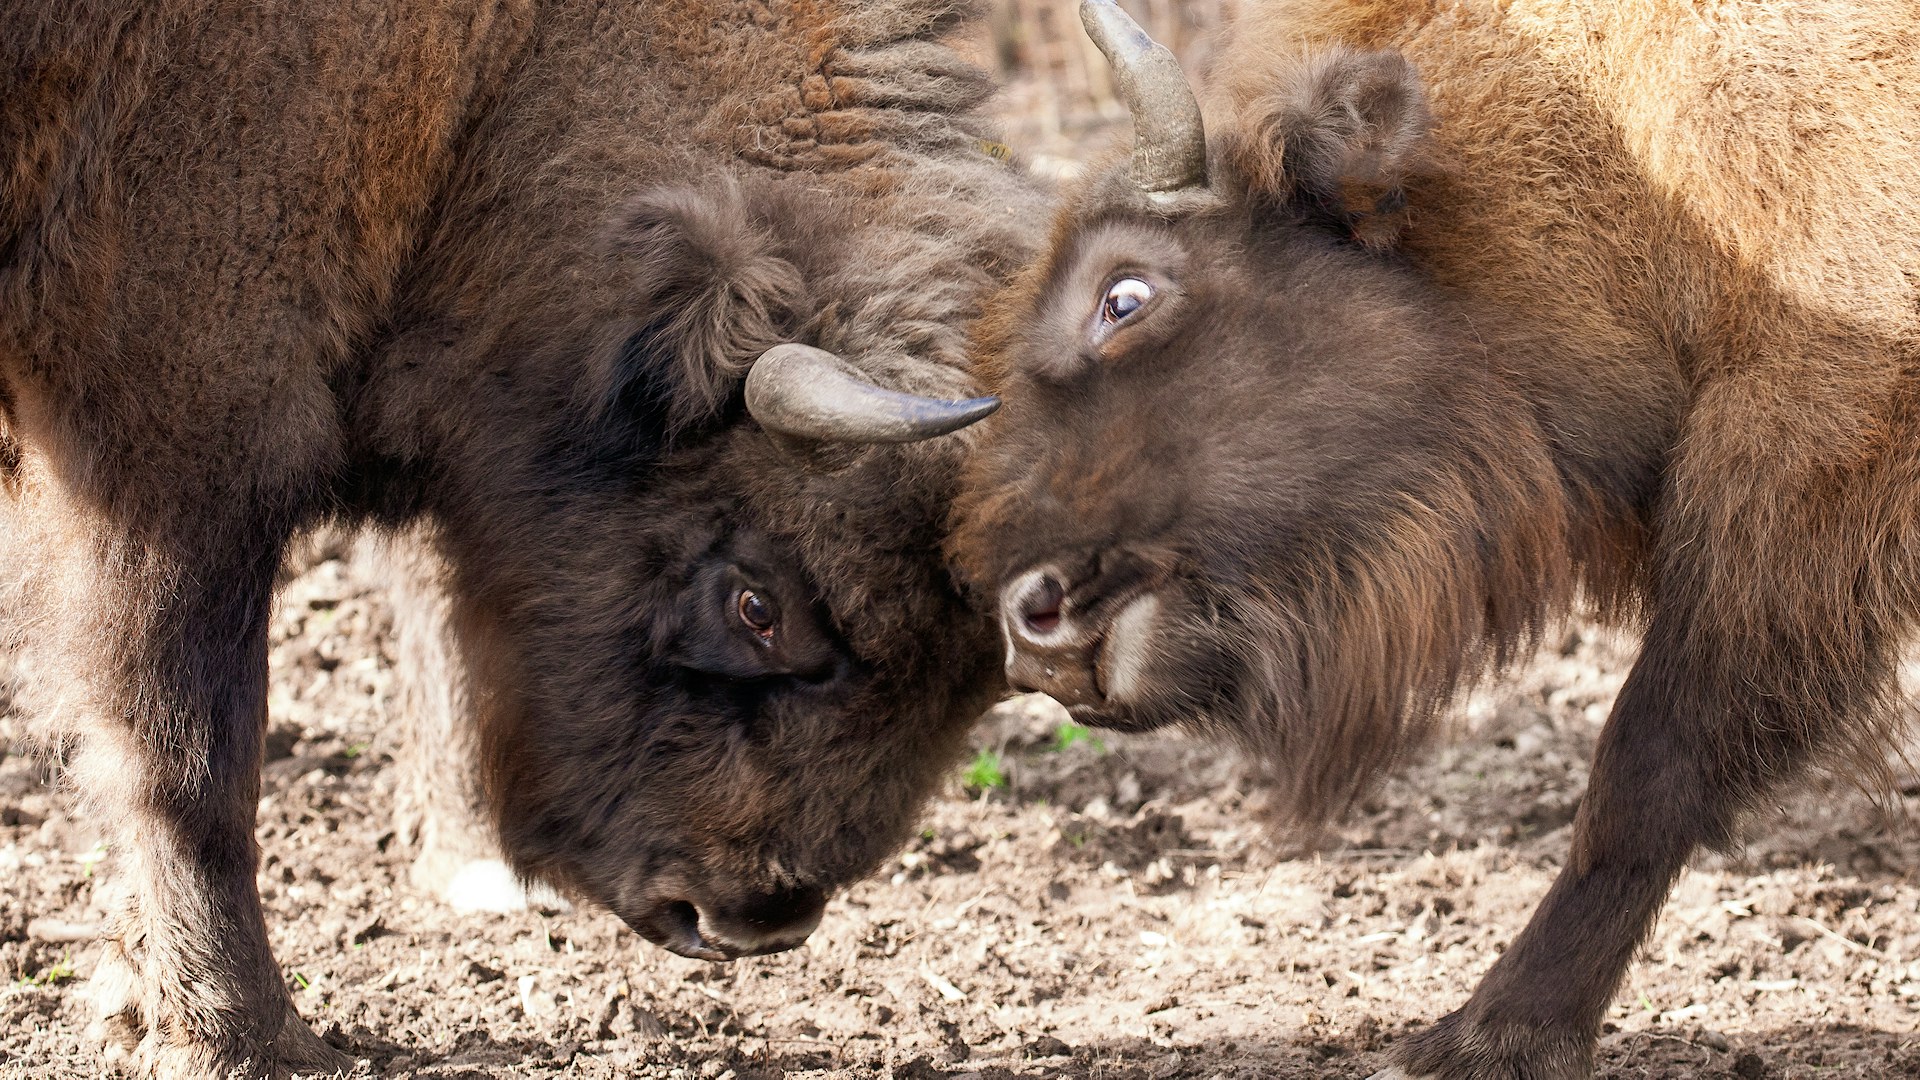 A close up shot of bison bull and female locking horns